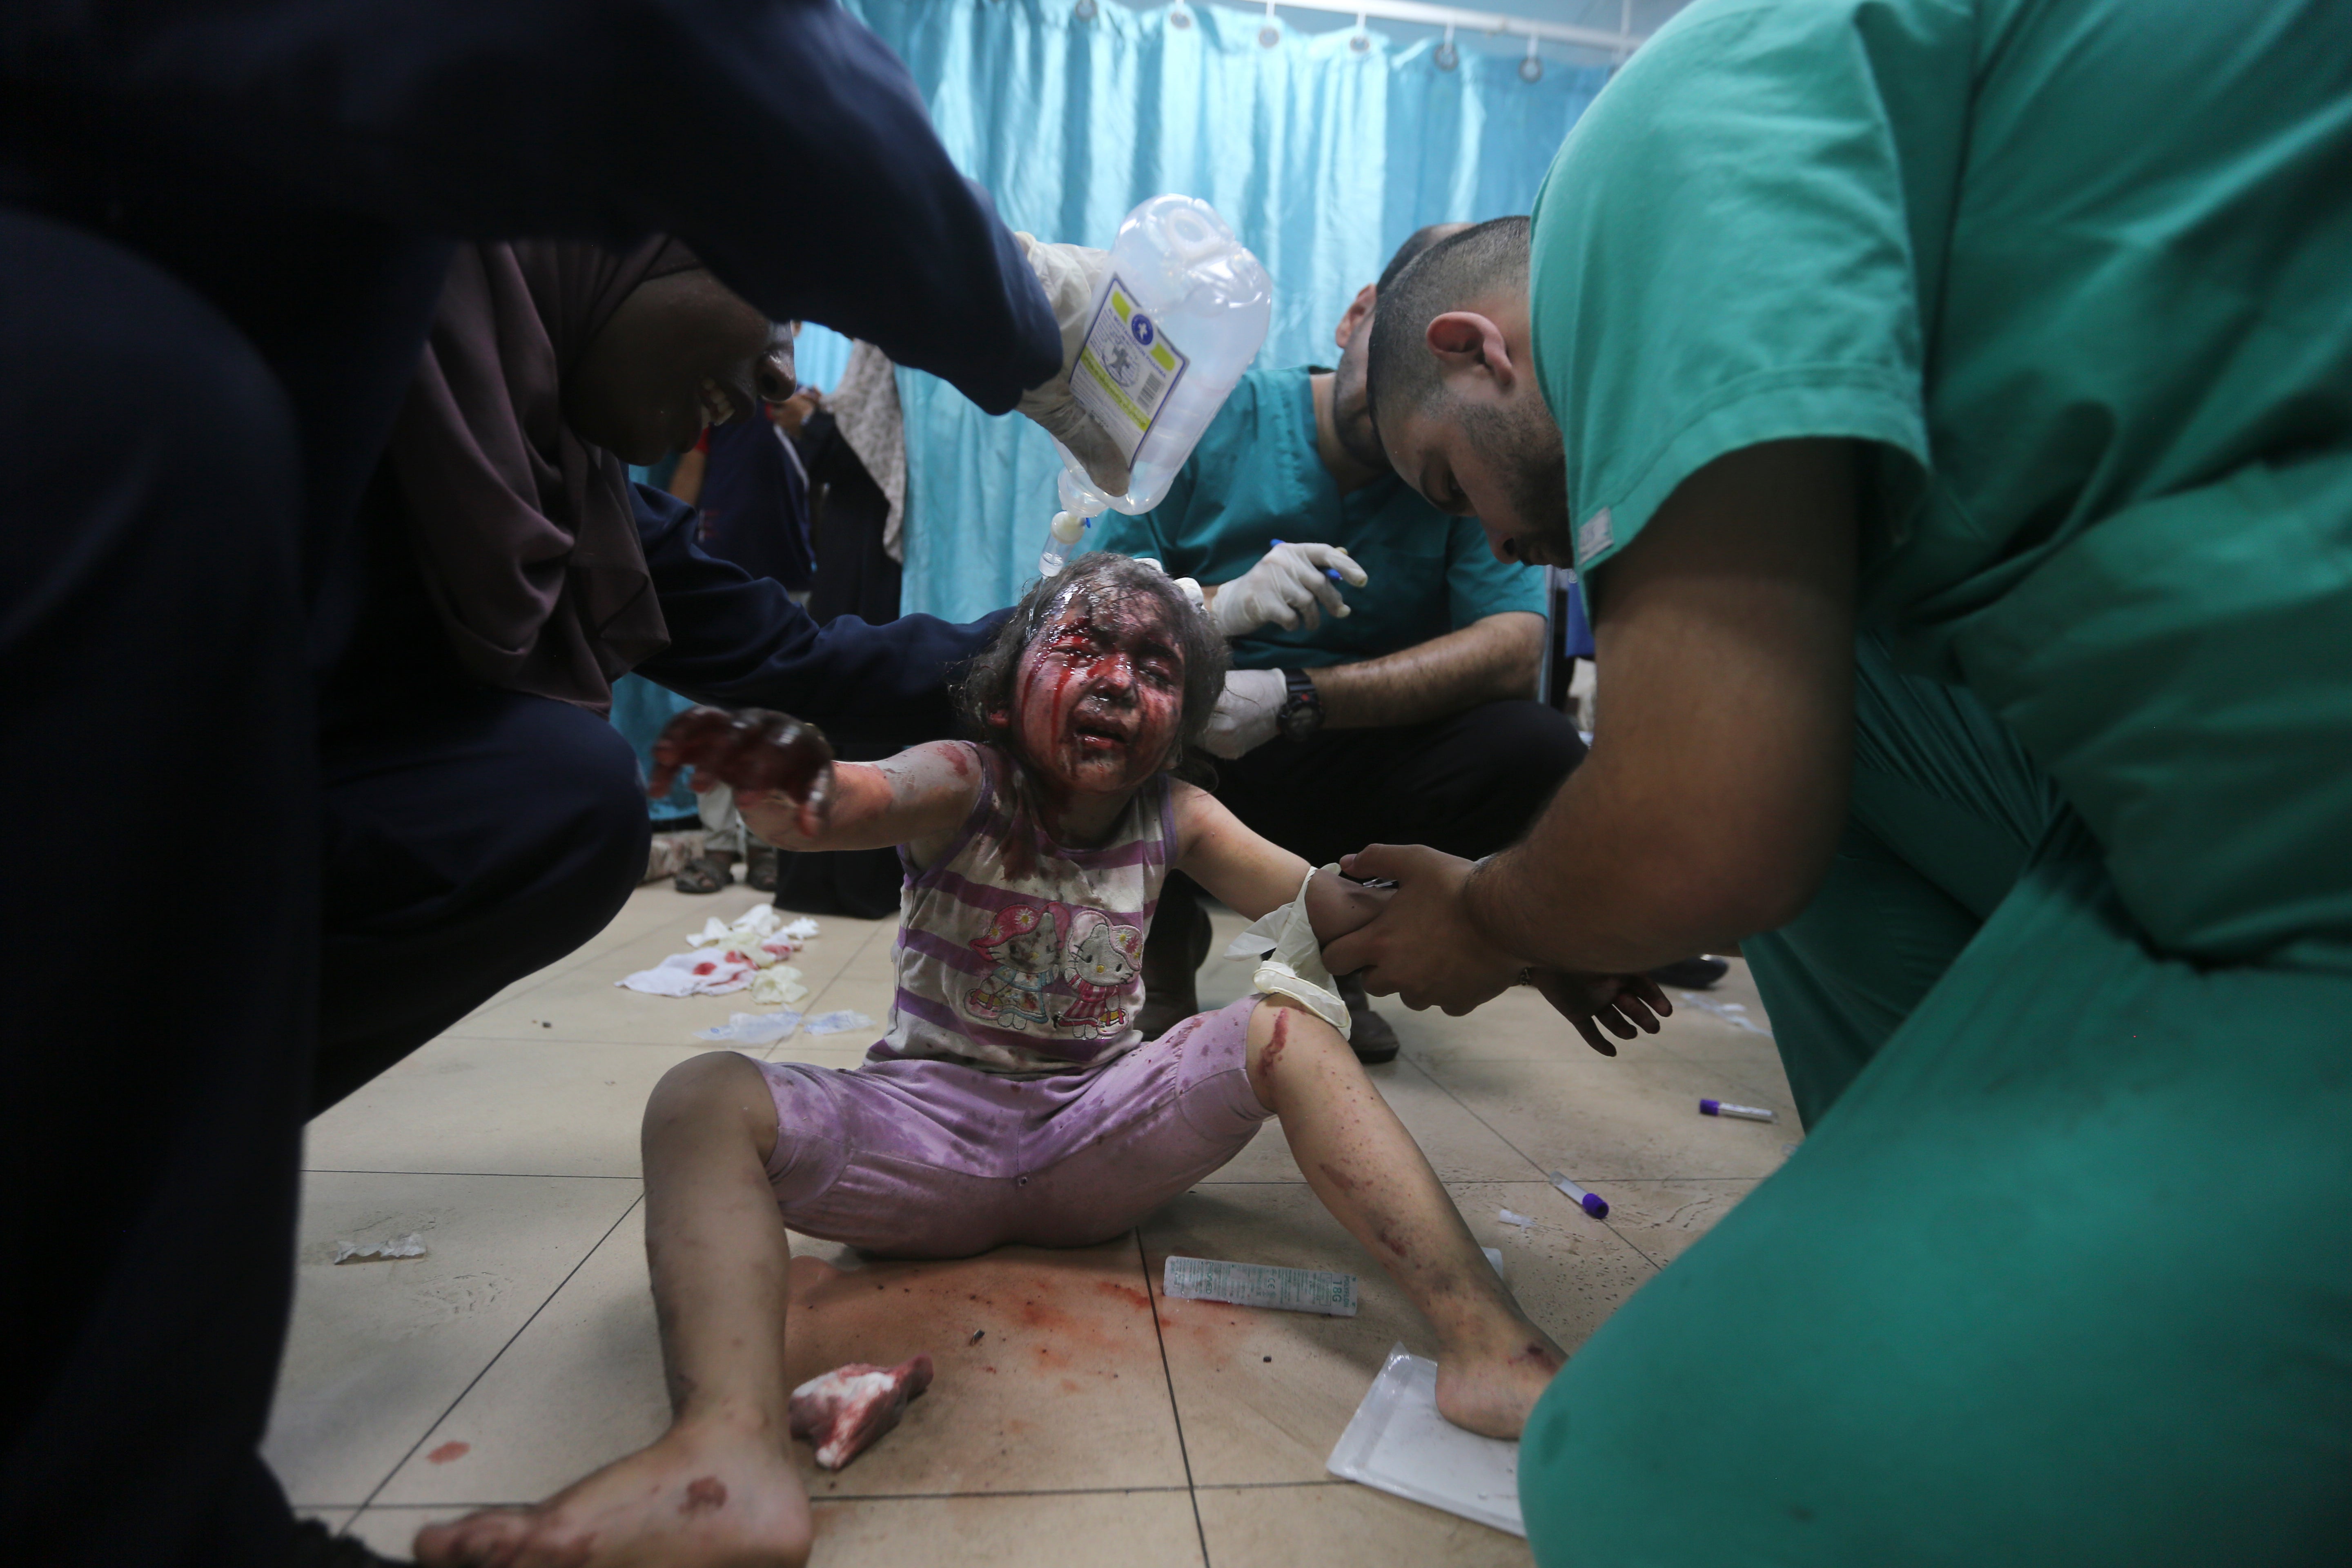 A wounded Palestinian child is treated at Al-Aqsa Hospital in Gaza